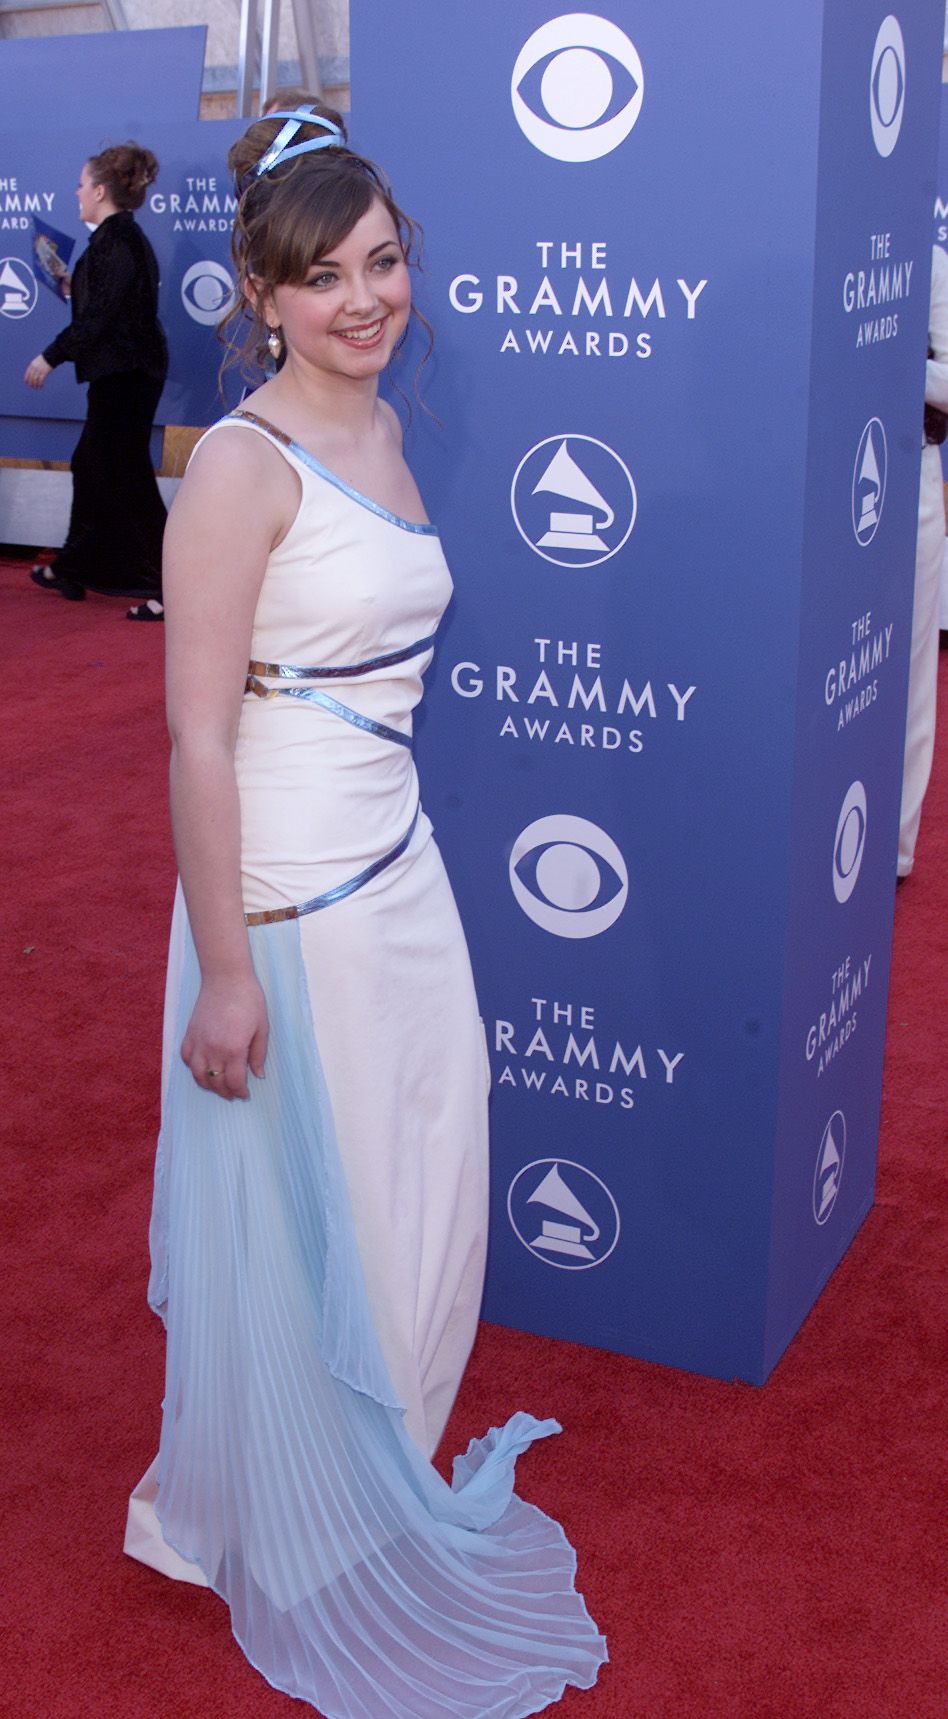 Charlotte Church arrives at the 43rd Annual Grammy Awards at Staples Center in Los Angeles, CA on February 21, 2001. Photo credit: Kevin Winter/Getty Images